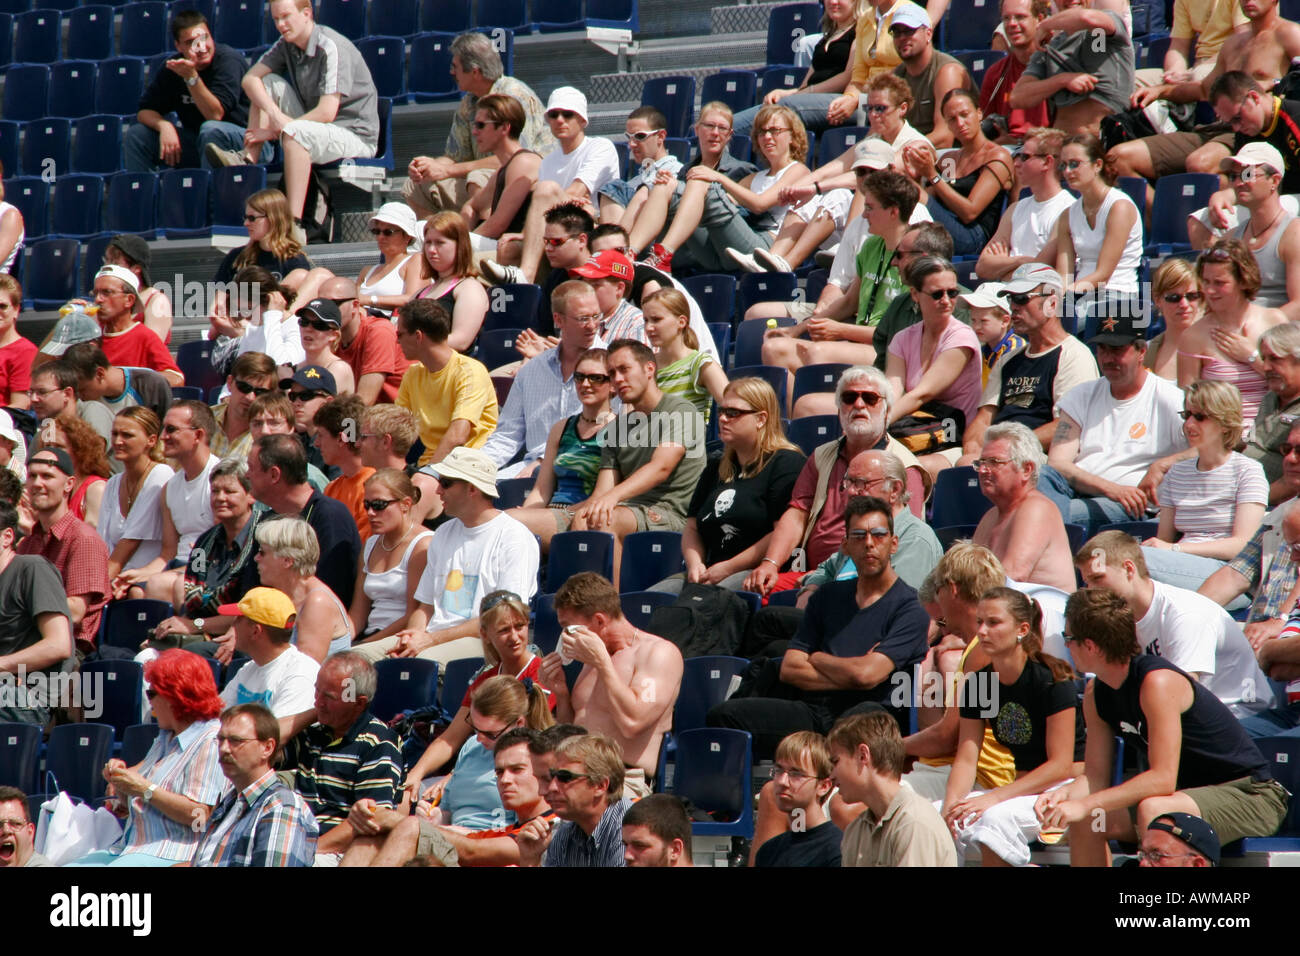 Audience at a public sports event, Berlin, Germany, Europe Stock Photo